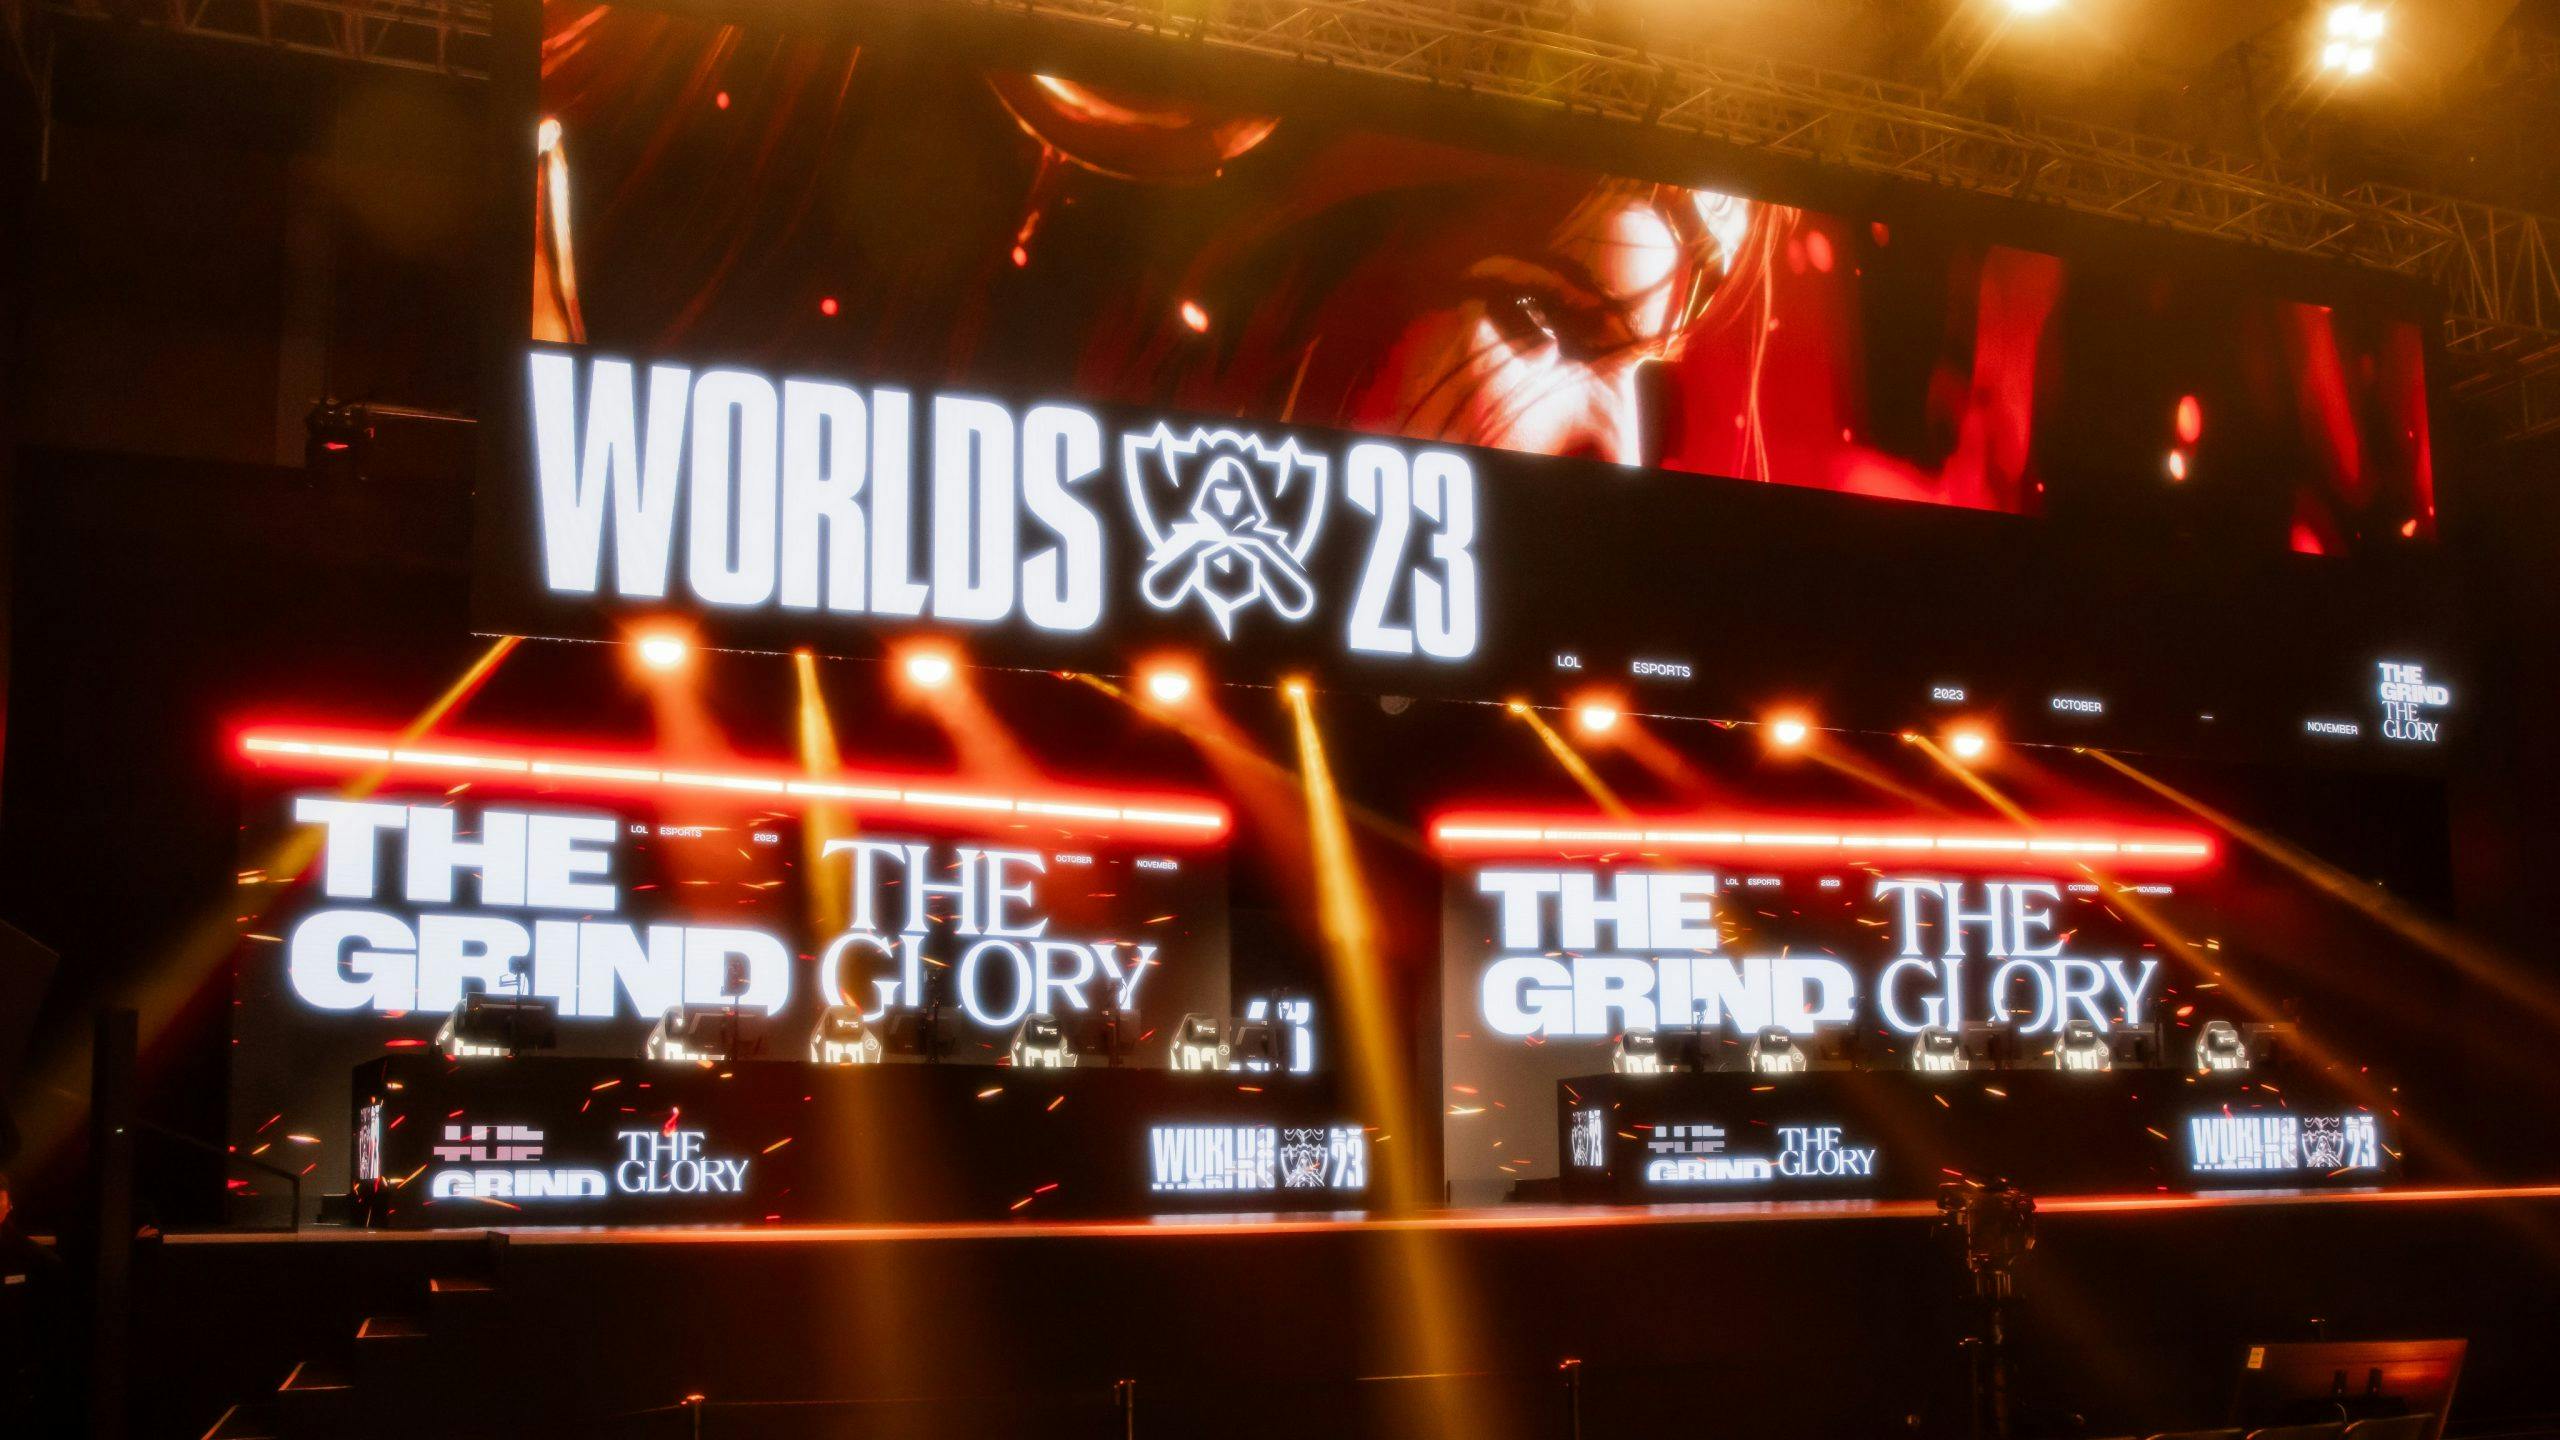 League of Legends Worlds 2023 Swiss stage: All qualified teams, schedule,  where to watch, and more